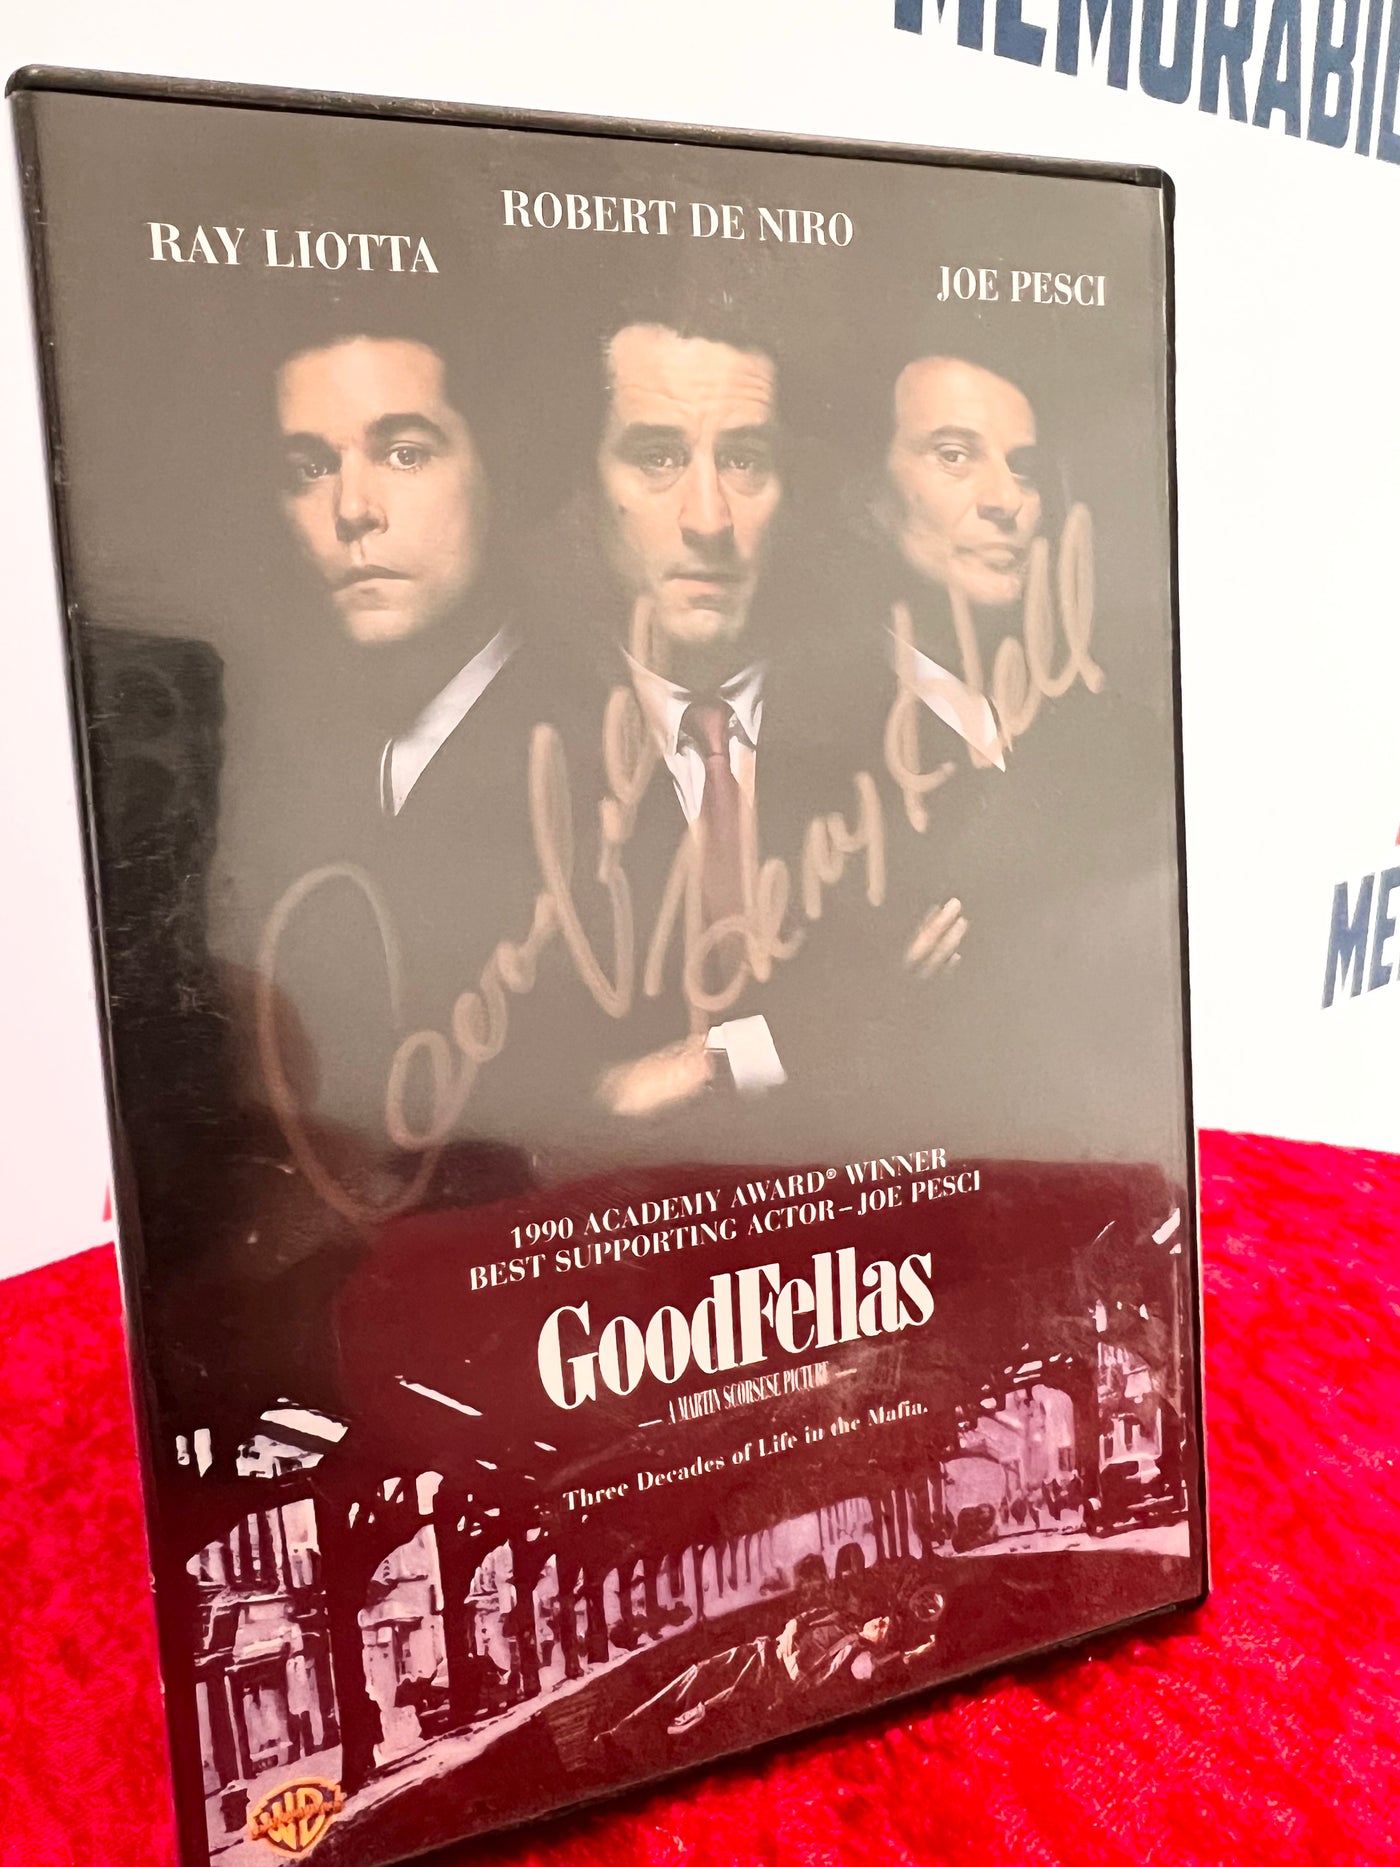 Signed Henry Hill Goodfellas DVD Real Life Gangster RARE Full authentication